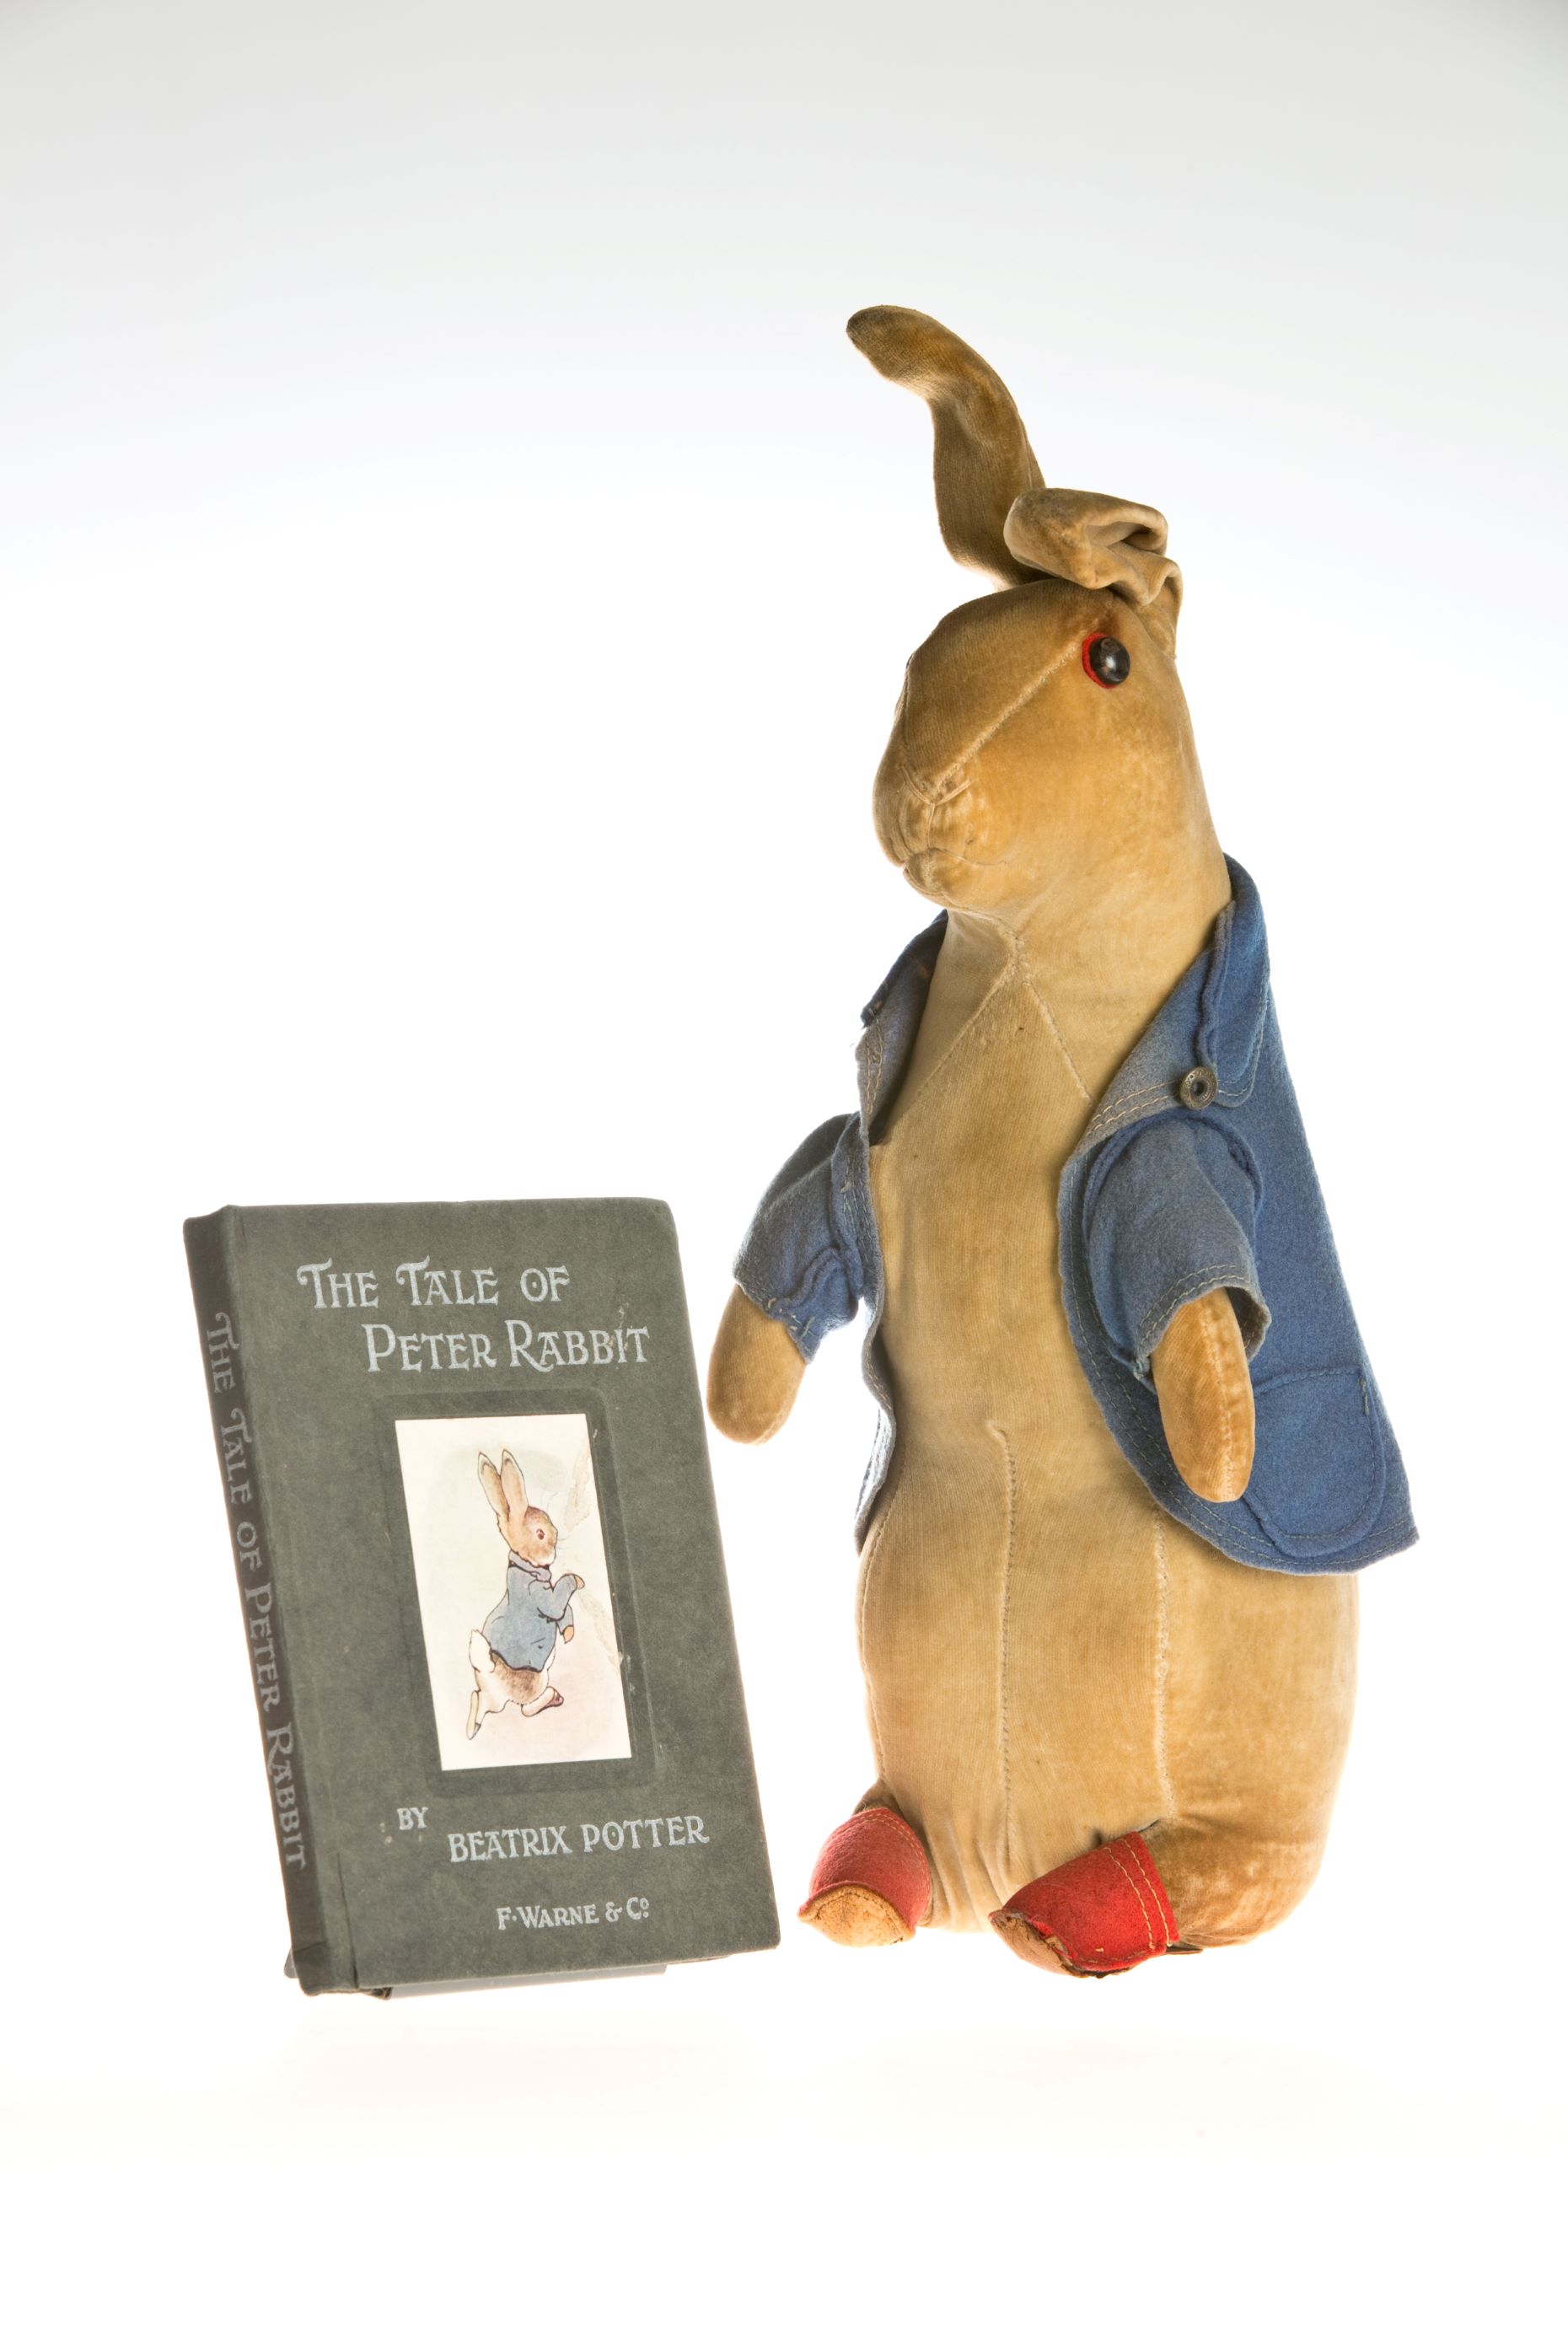 A Peter Rabbit soft toy with a copy of the Peter Rabbit book